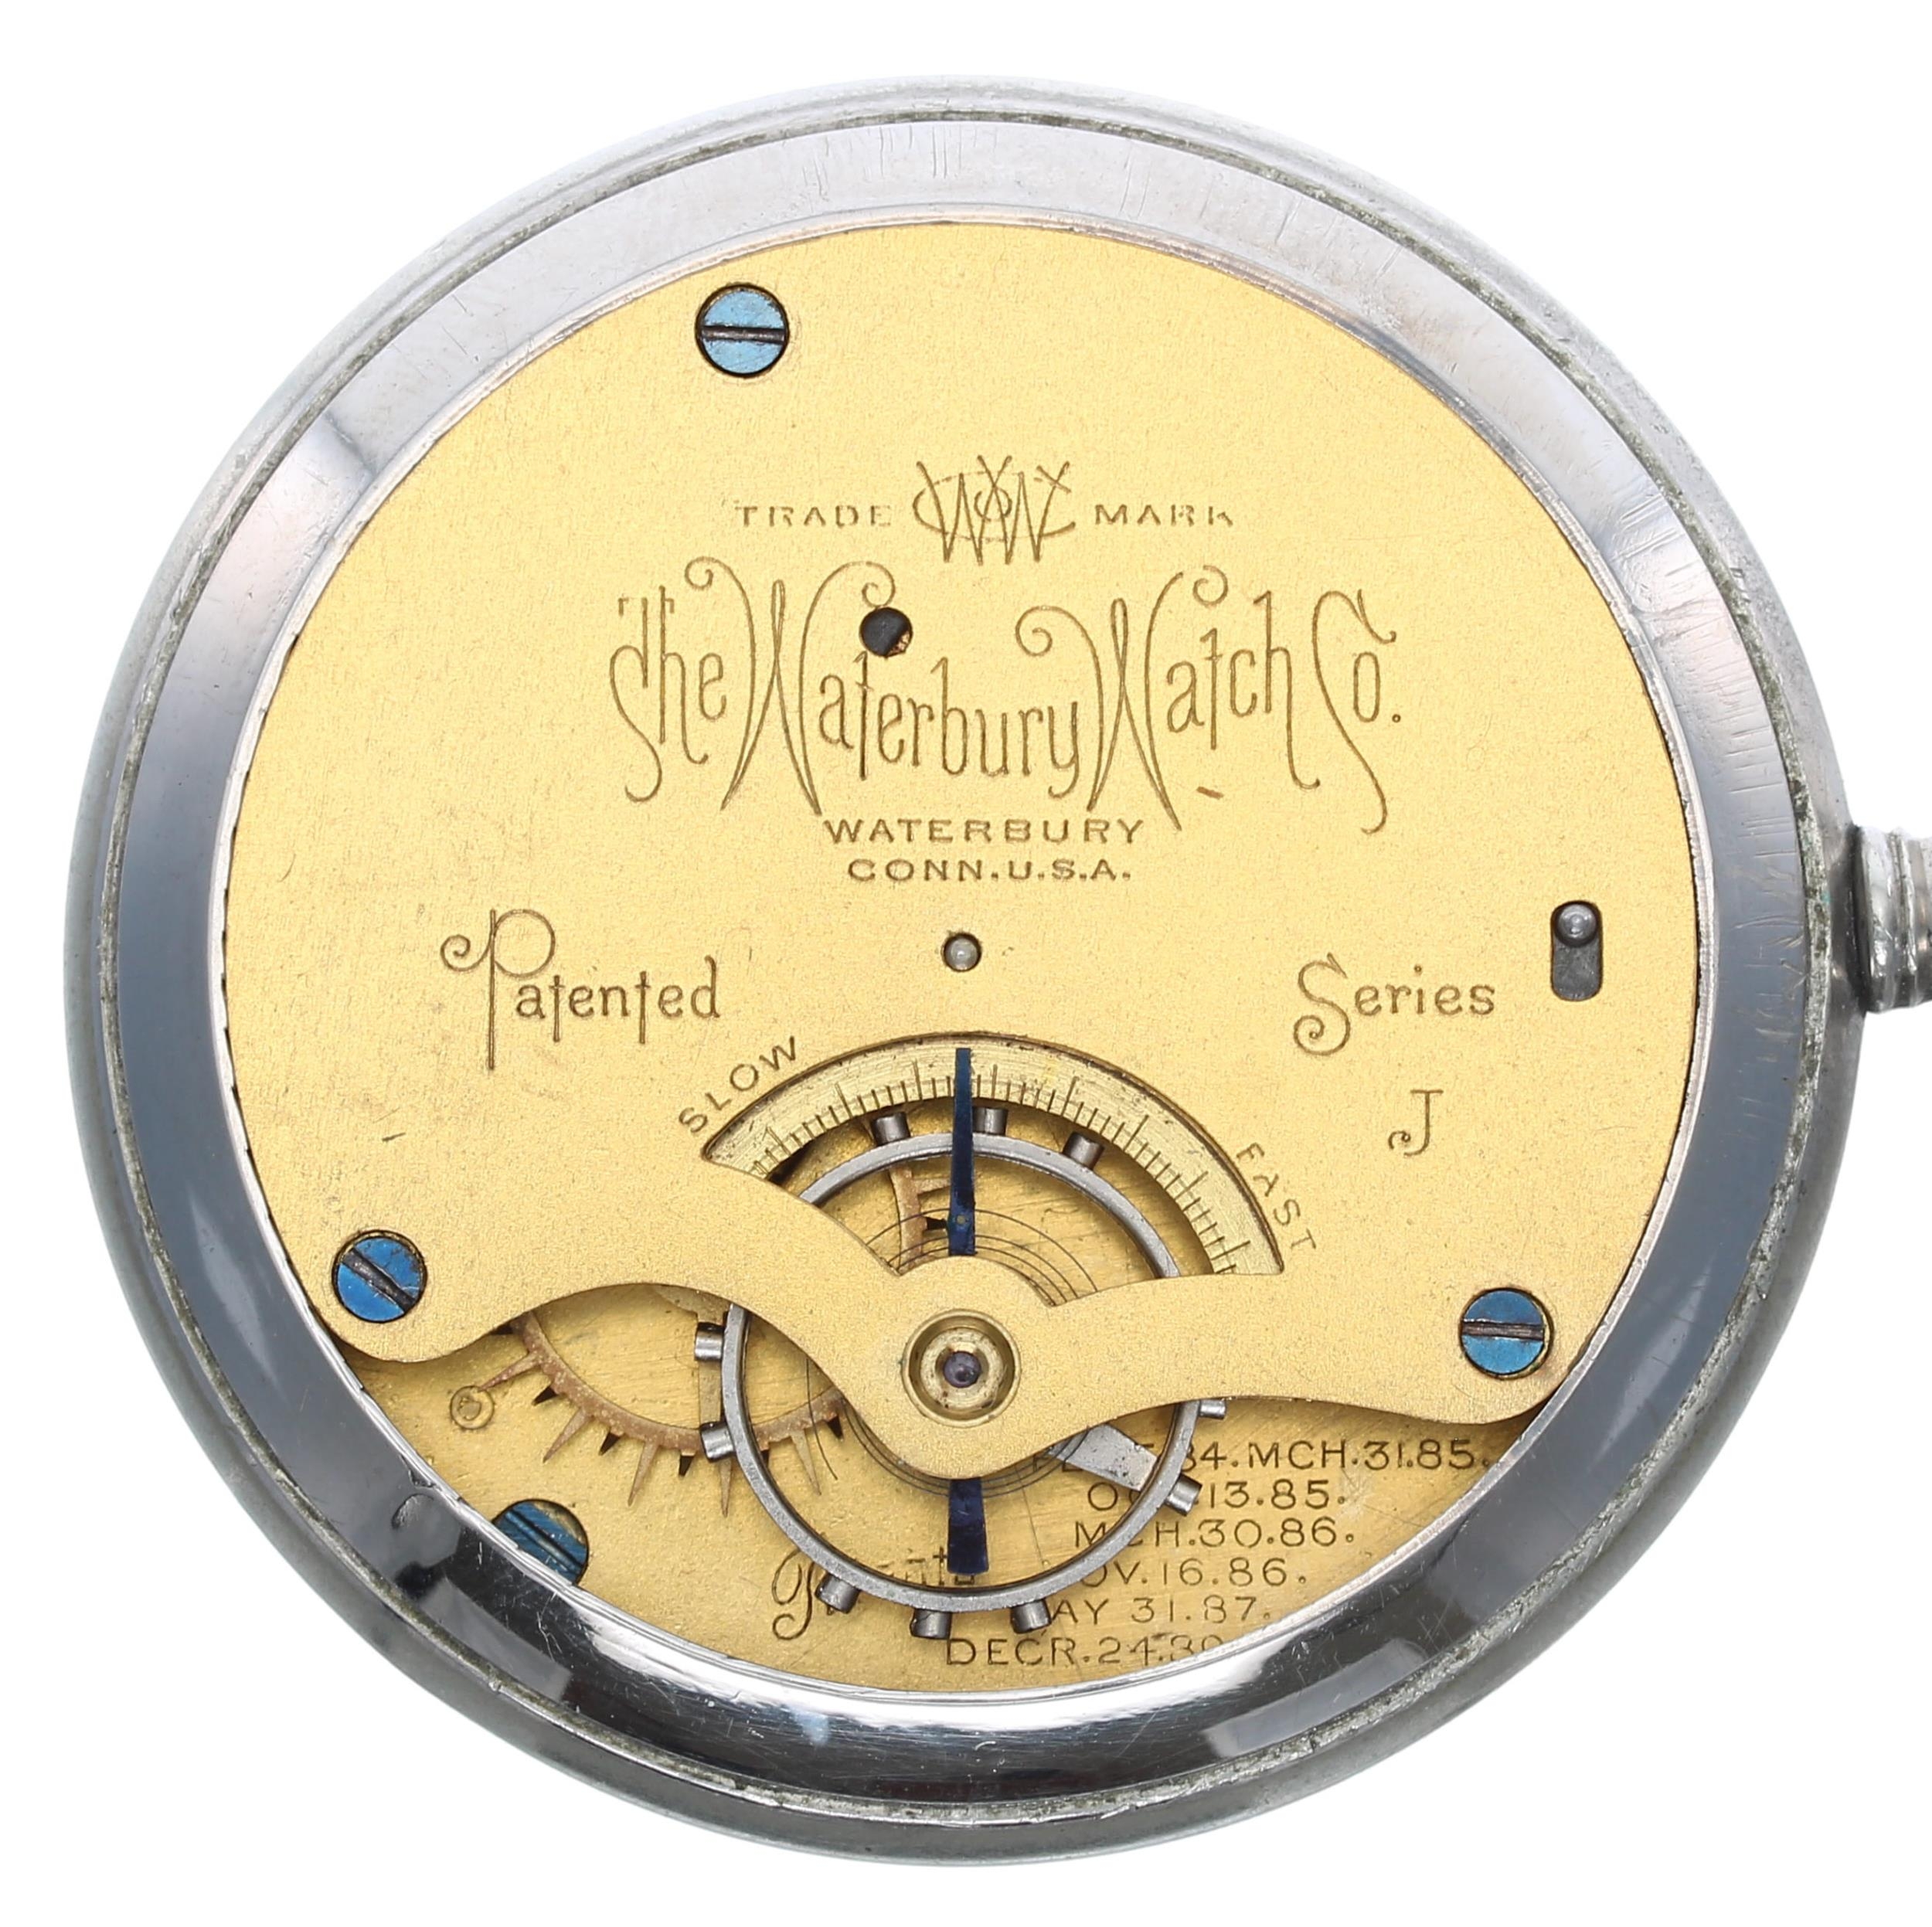 Waterbury Watch Co. Series J duplex nickel cased pocket watch, signed movement and dial, within an - Image 2 of 3